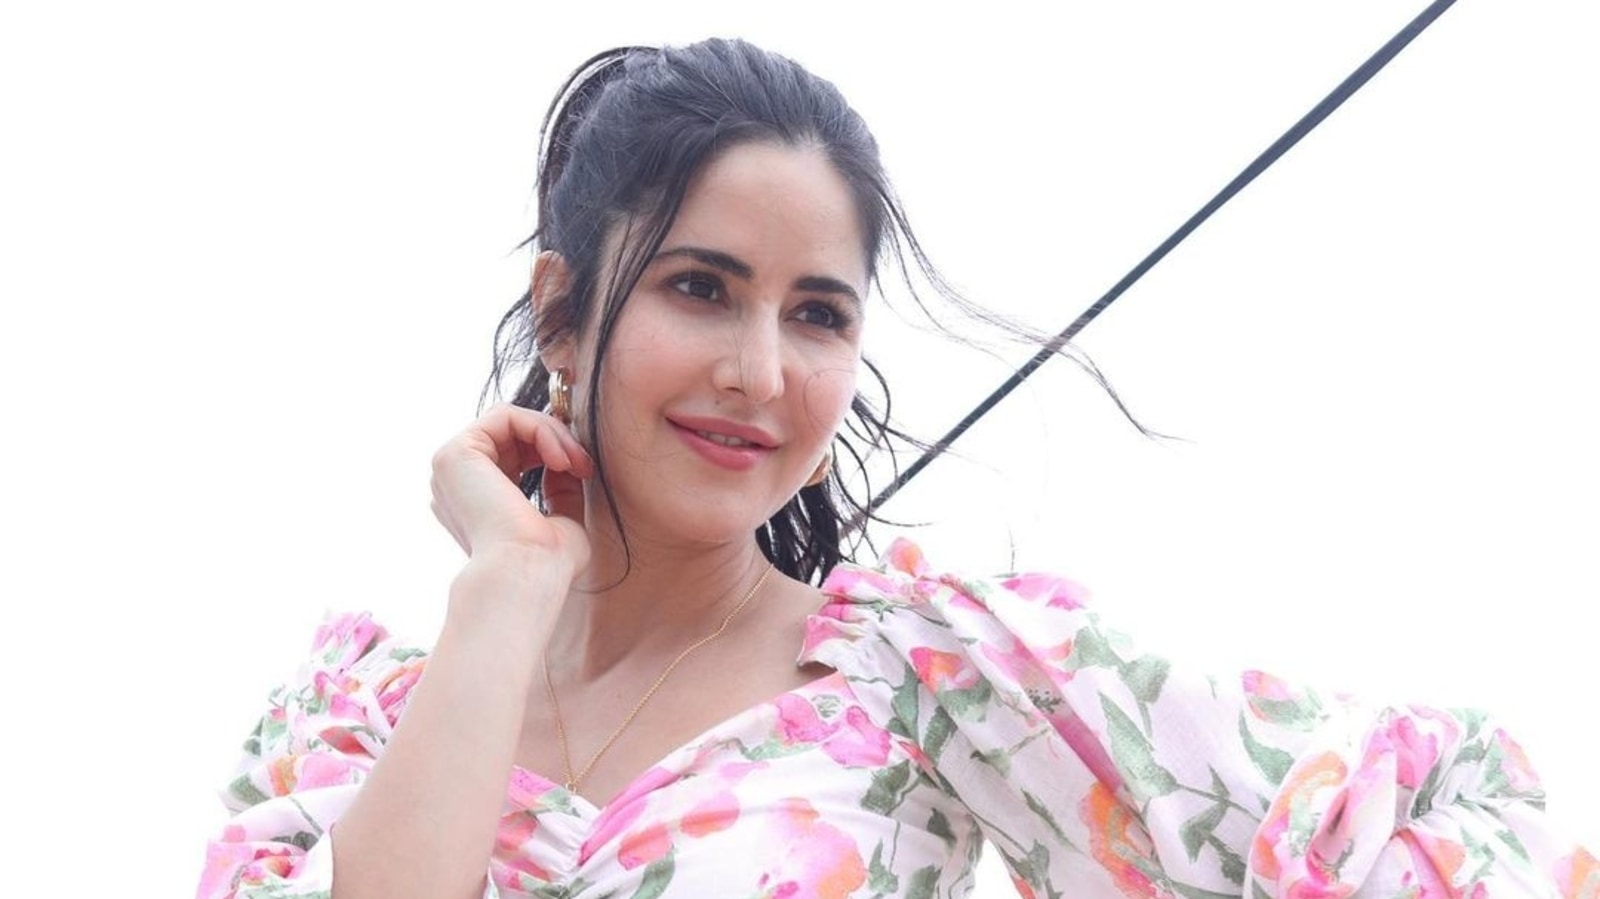 Katrina Kapoor Ki Chut Download - Katrina Kaif is all about flower power in new photos, fan says 'waiting for  Vicky Kaushal's comment' | Bollywood - Hindustan Times